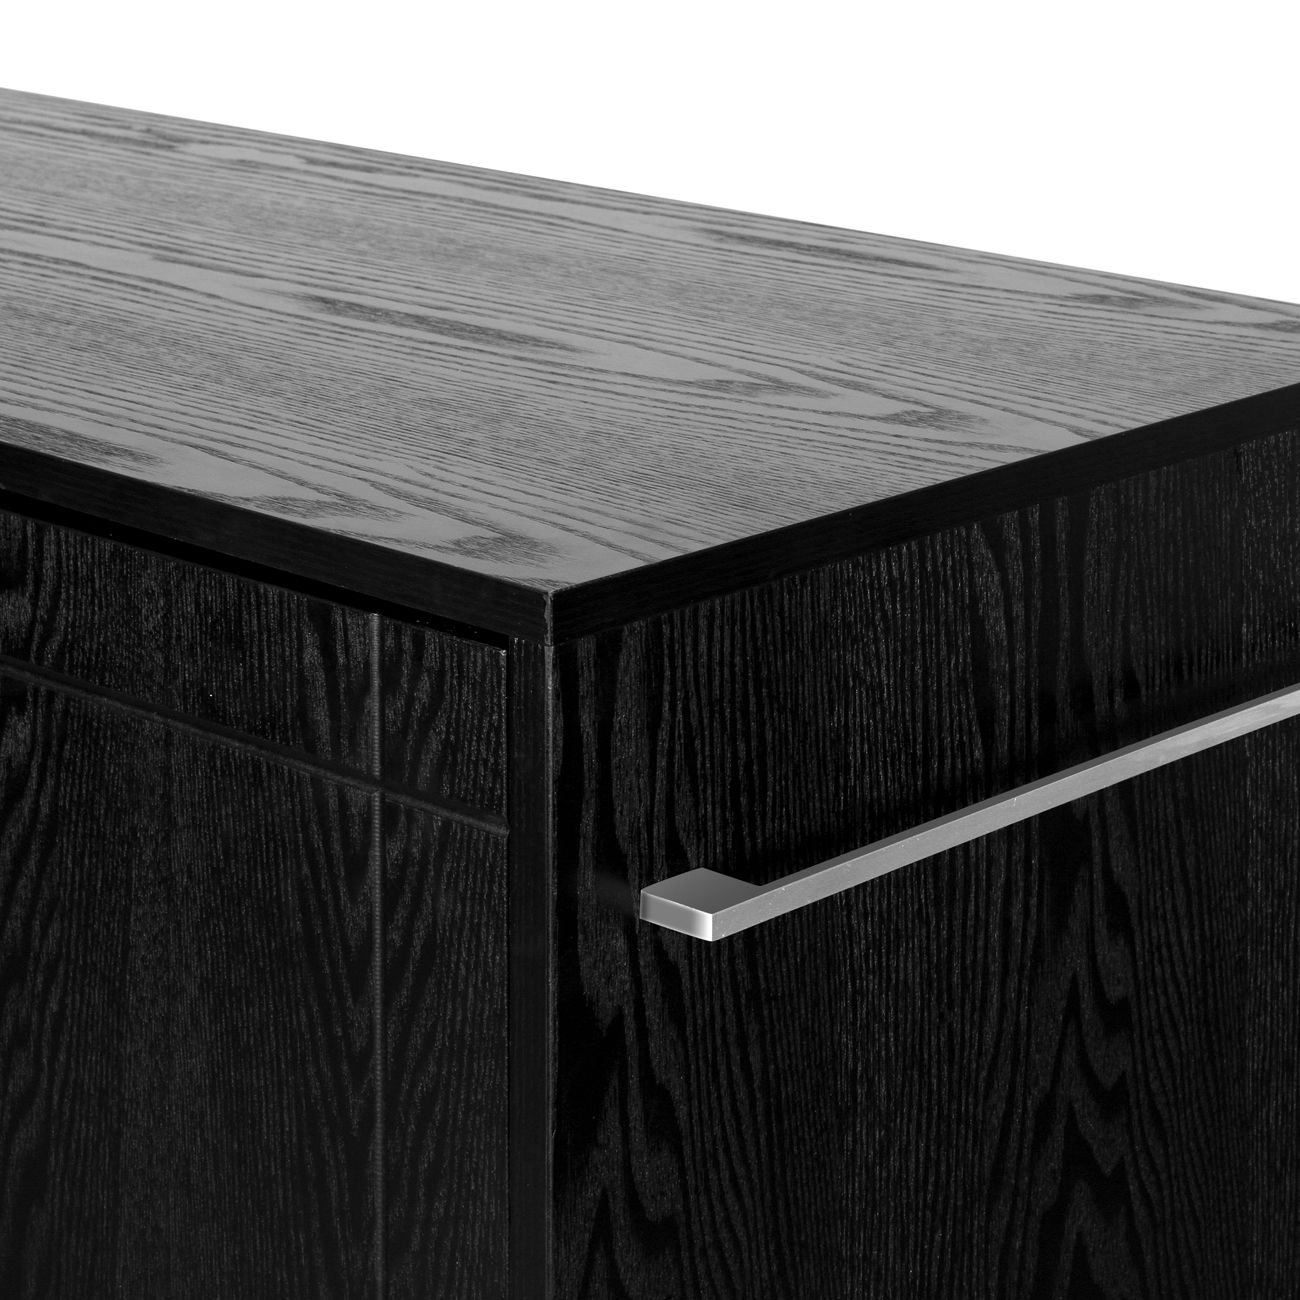 Details About Modern Buffet Server Sideboard Bar Cabinet With Wine Storage  And Racks, Black With Regard To Modern Black Storage Buffets (View 16 of 30)